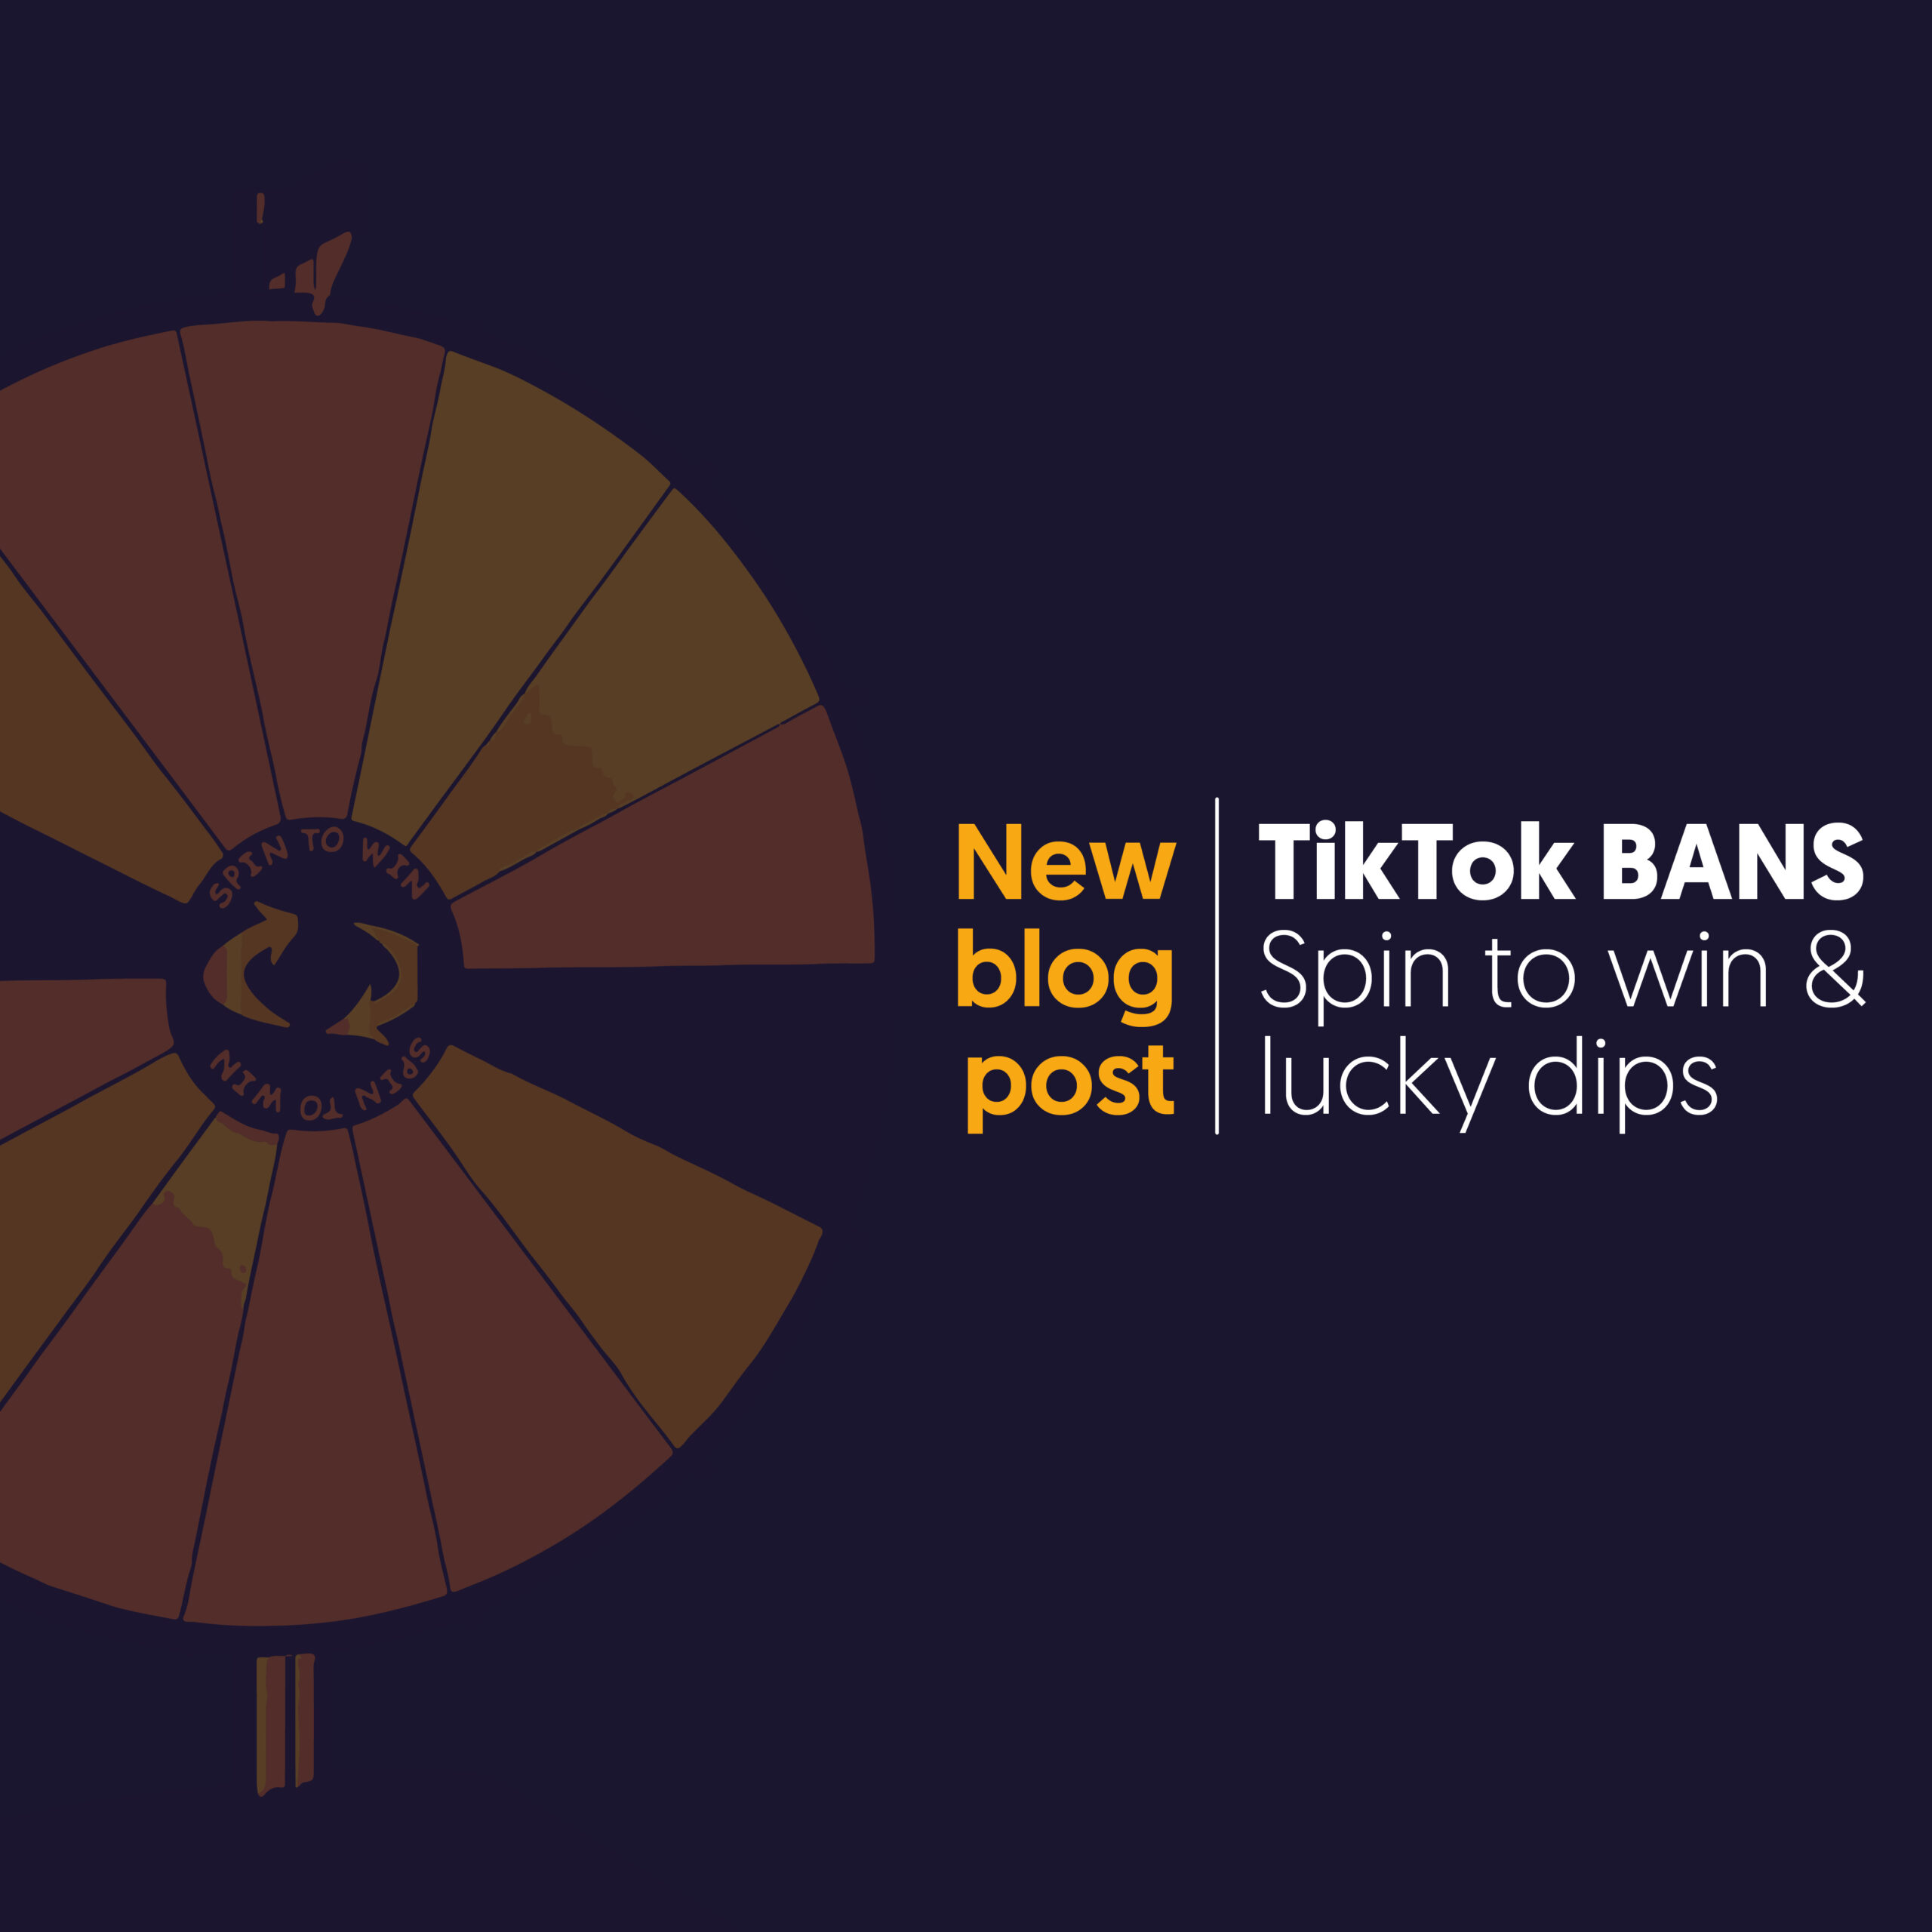 The Impact of TikTok’s Ban on Spin to Win, Giveaways and Lucky Dips